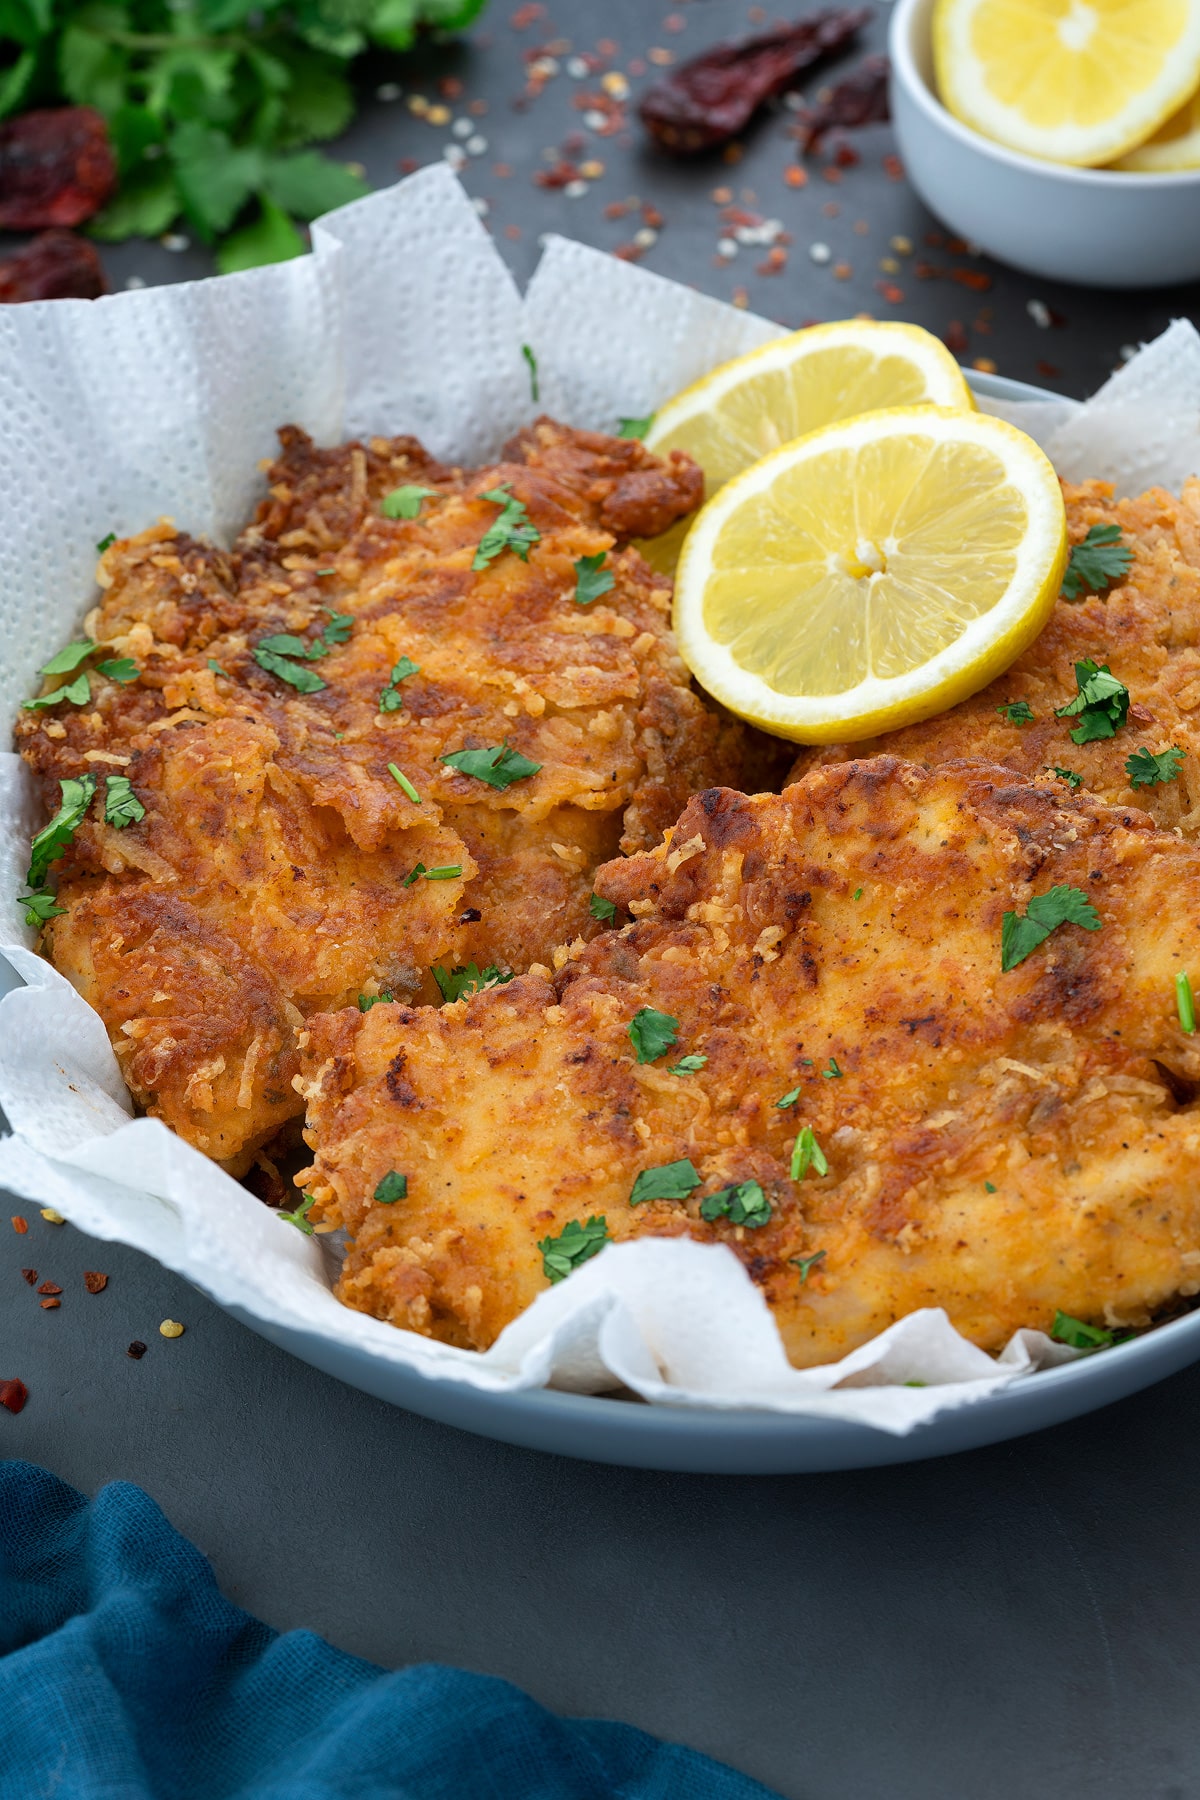 Parmesan Crusted Chicken in a bowl with lemon slides with few ingredients scattered around.